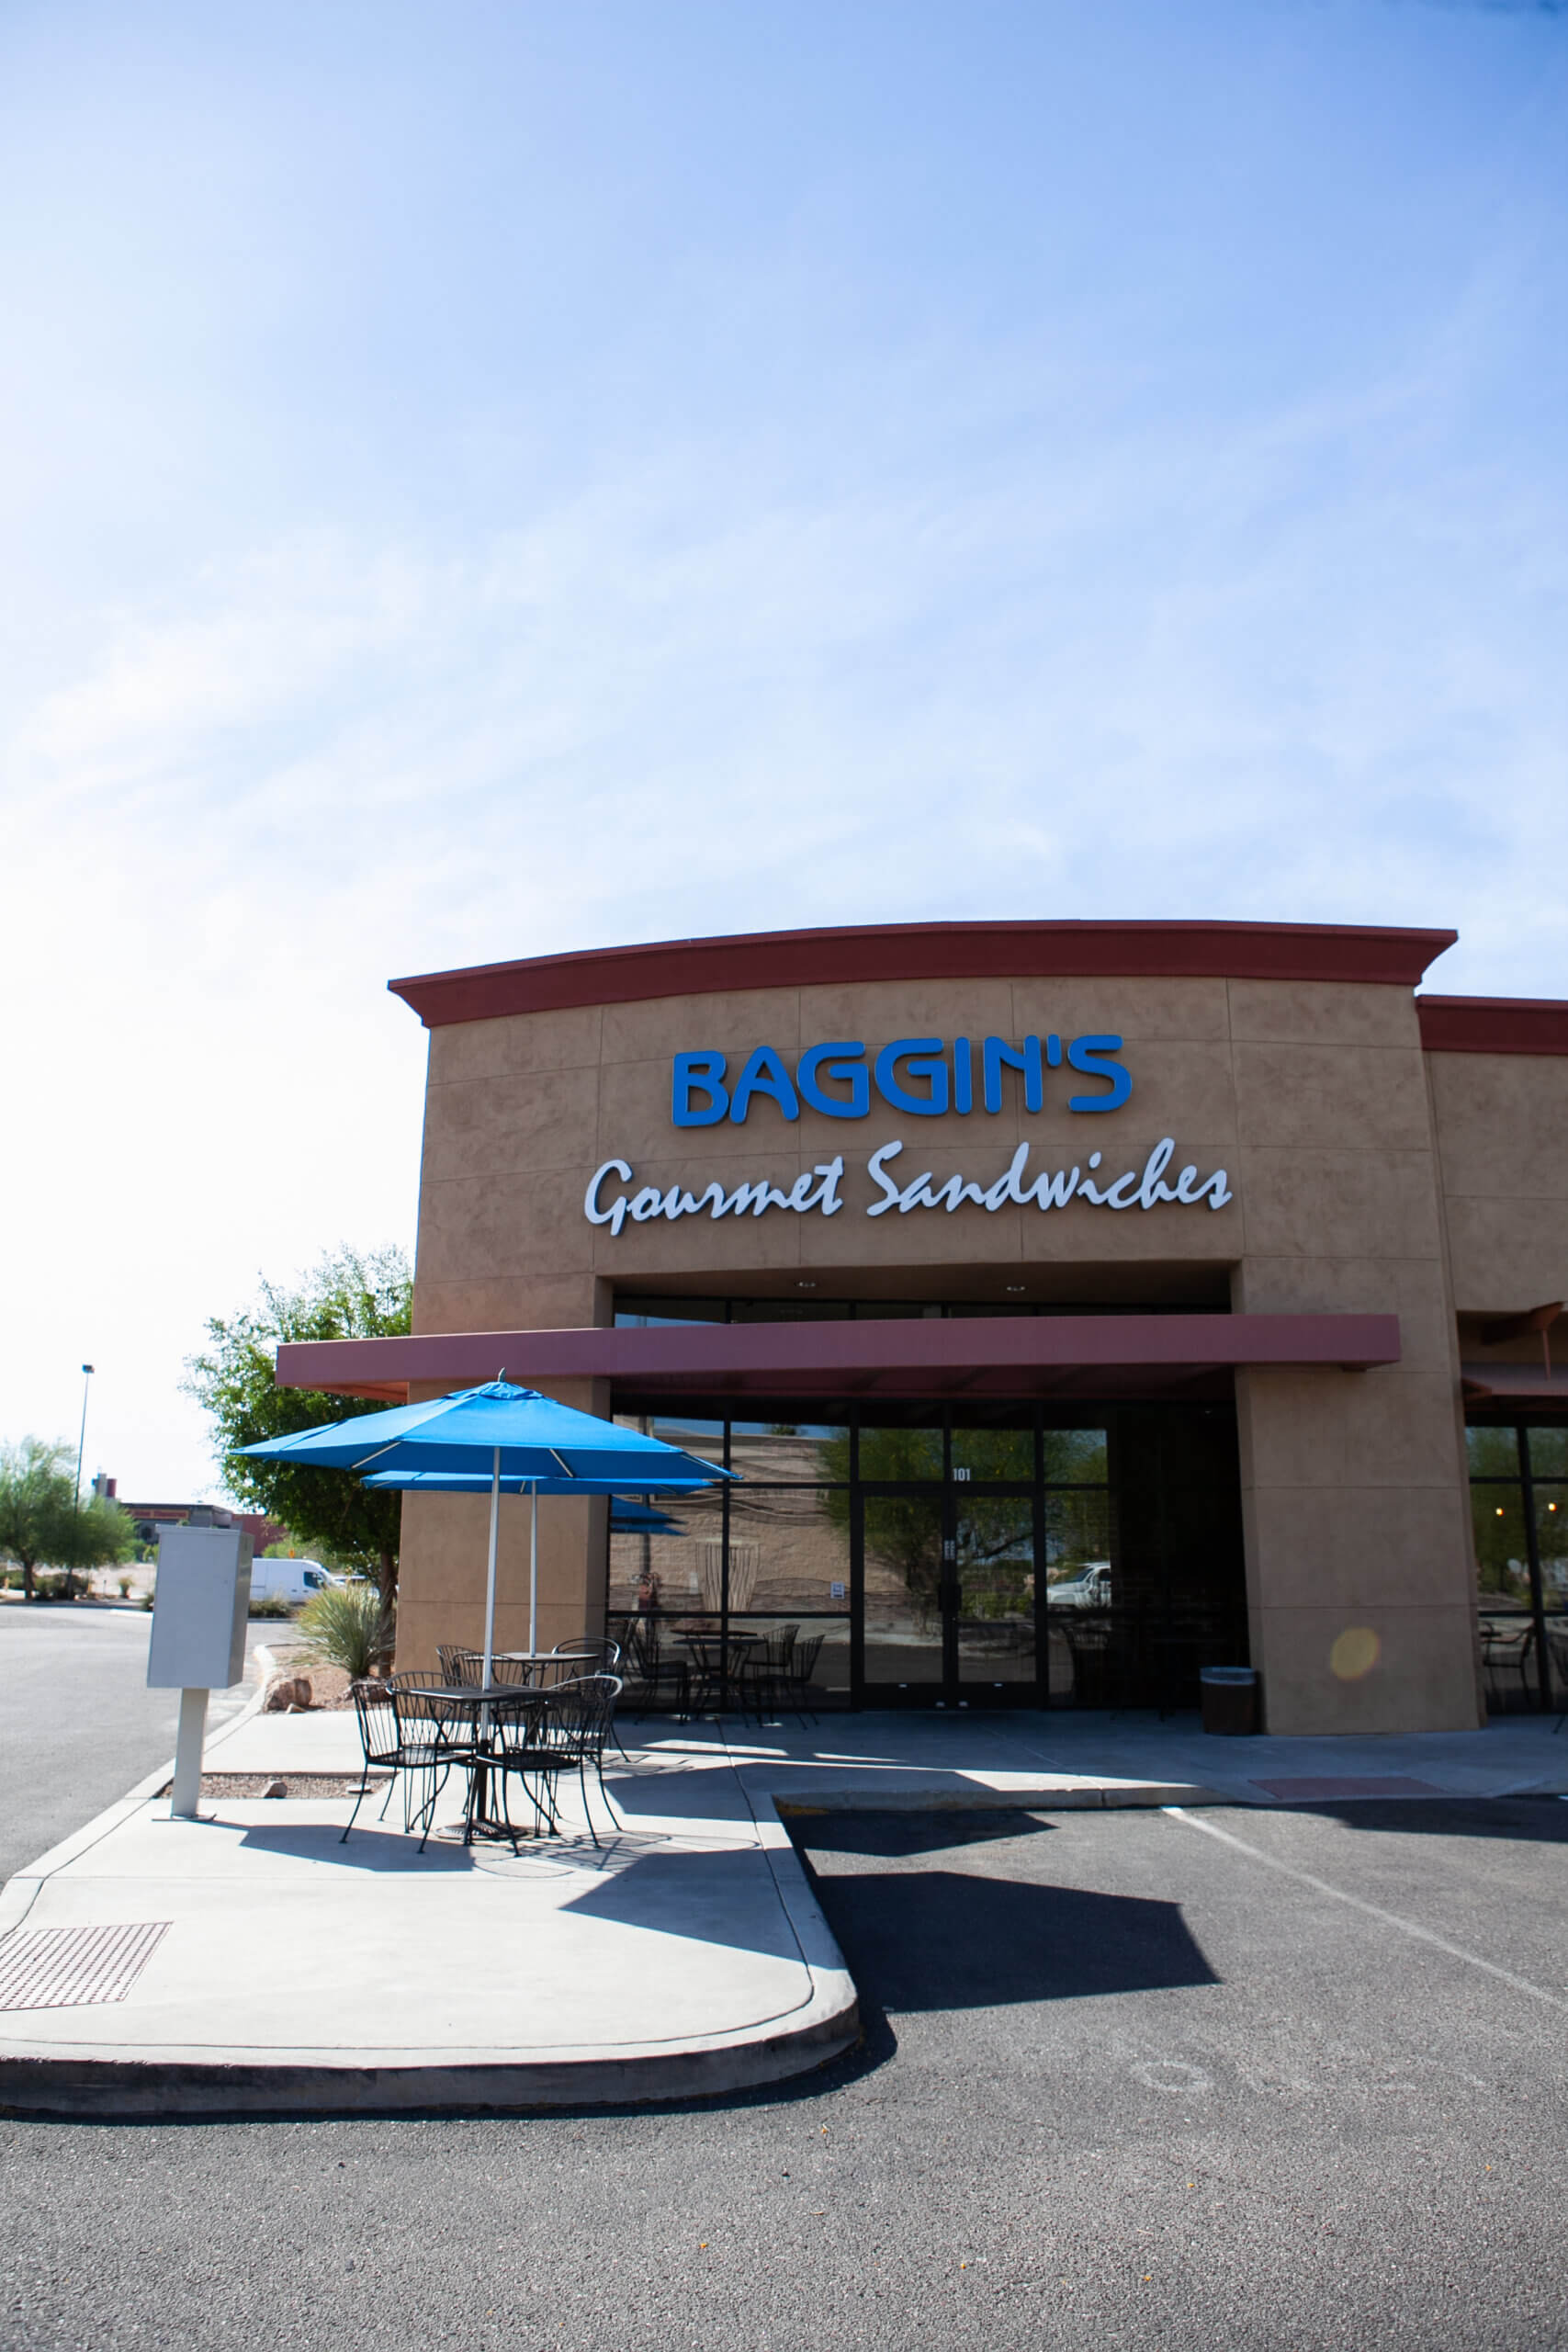 The exterior storefront of Baggin's Gourmet Sandwiches in Tucson